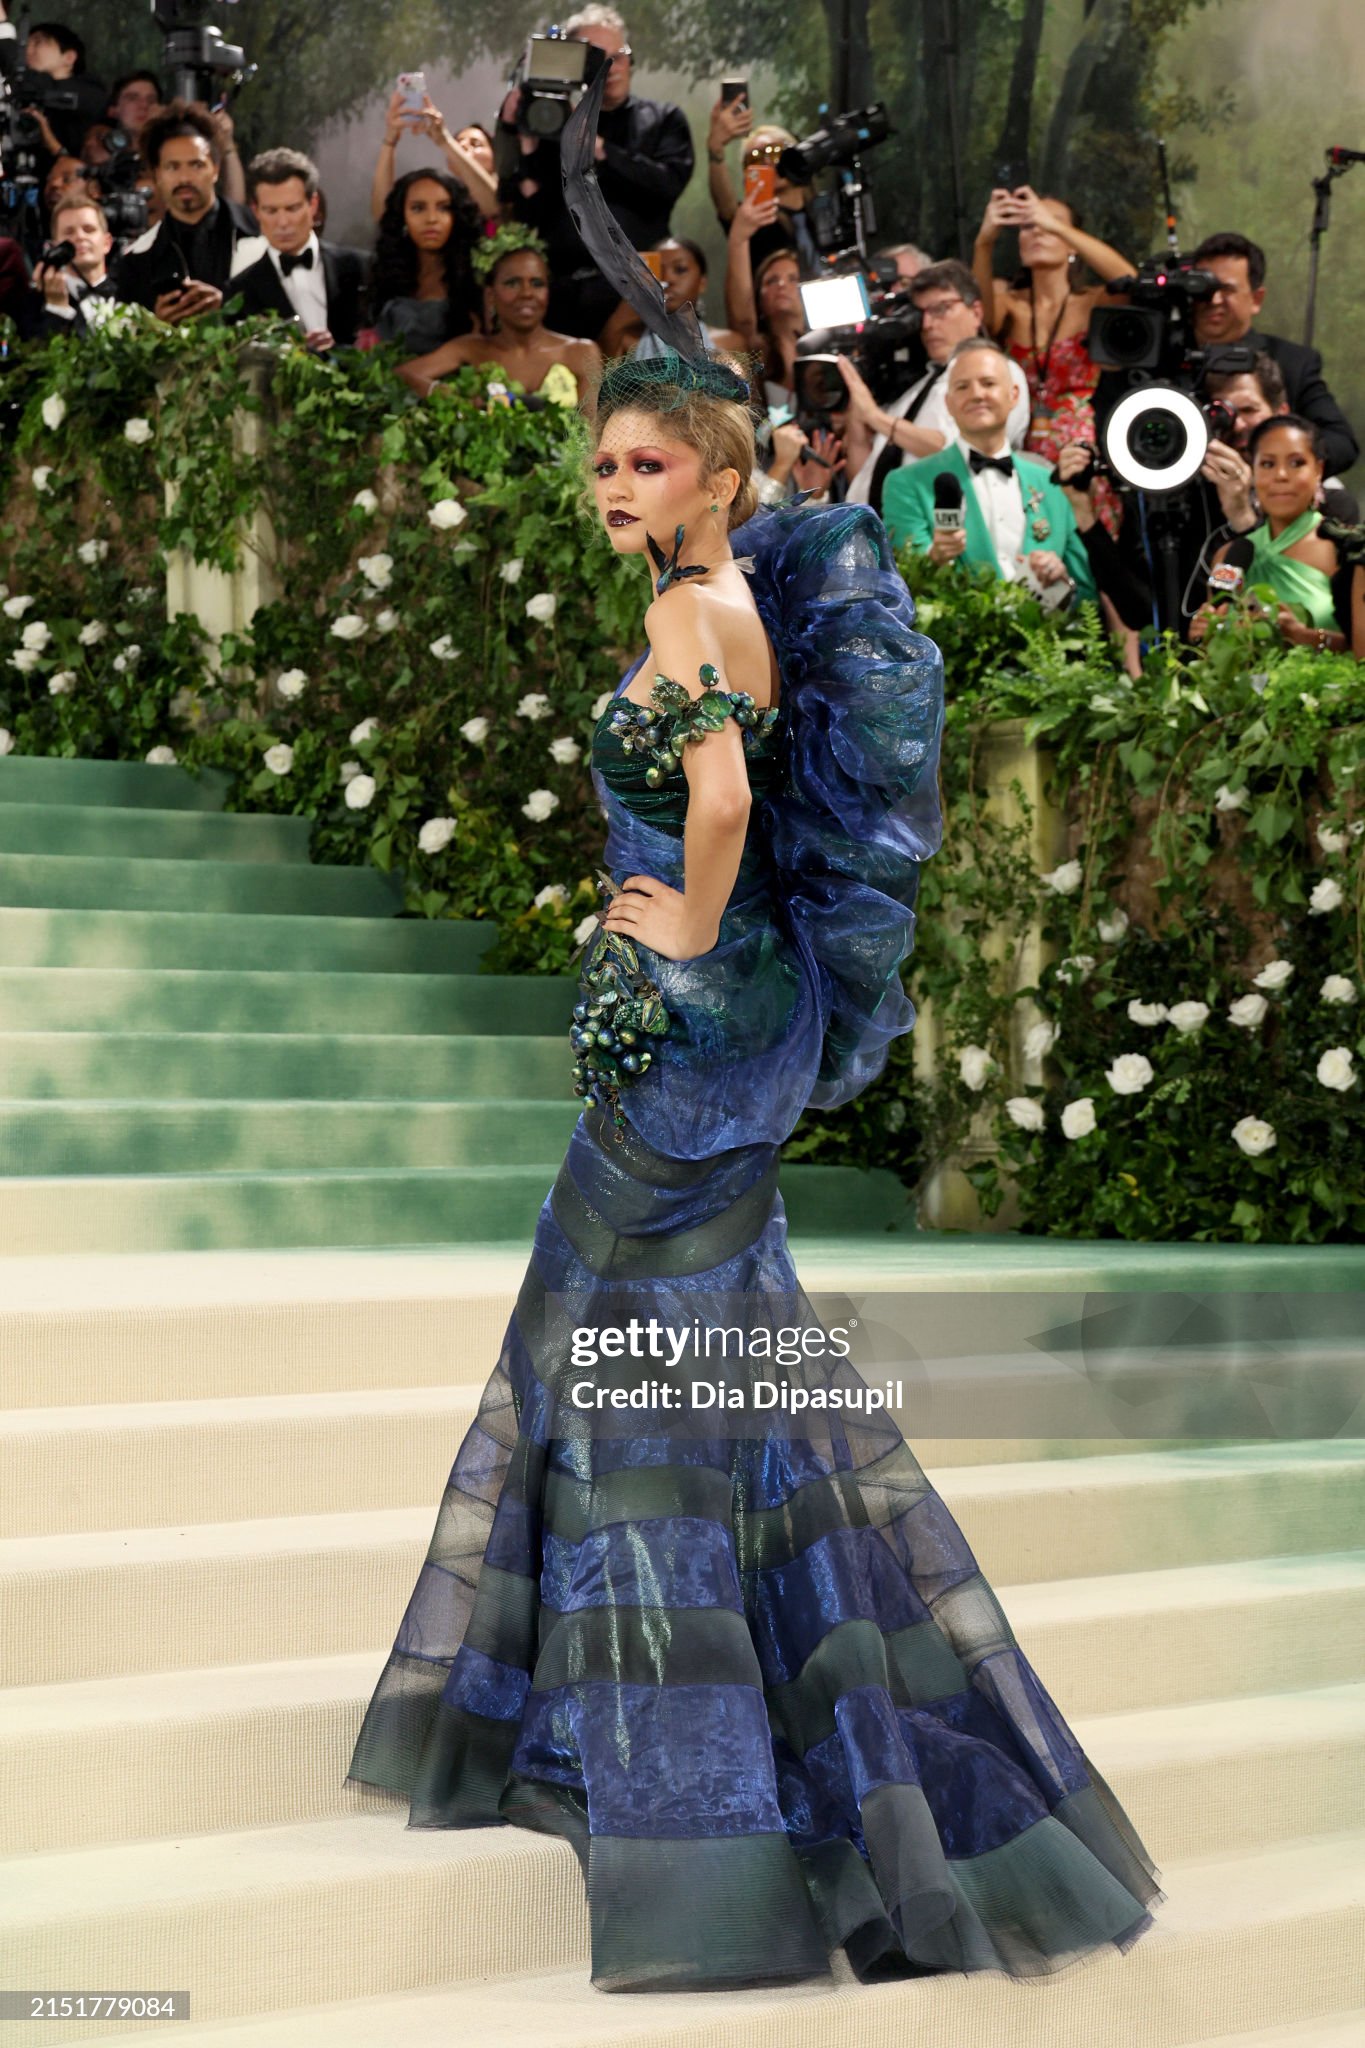 gettyimages-2151779084-2048x2048.jpg